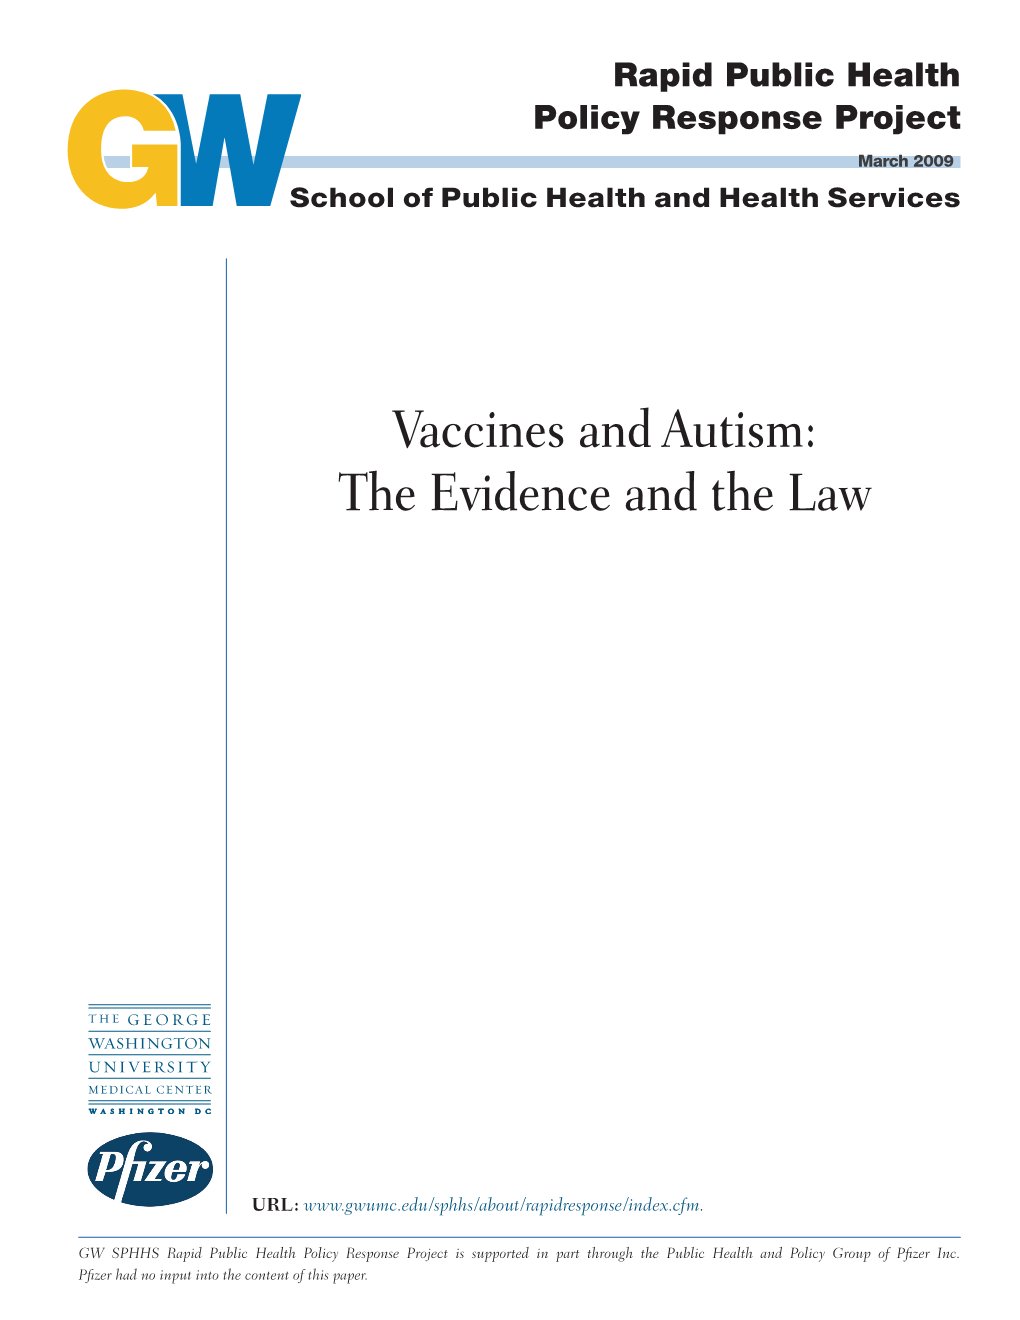 Vaccines and Autism: the Evidence and the Law